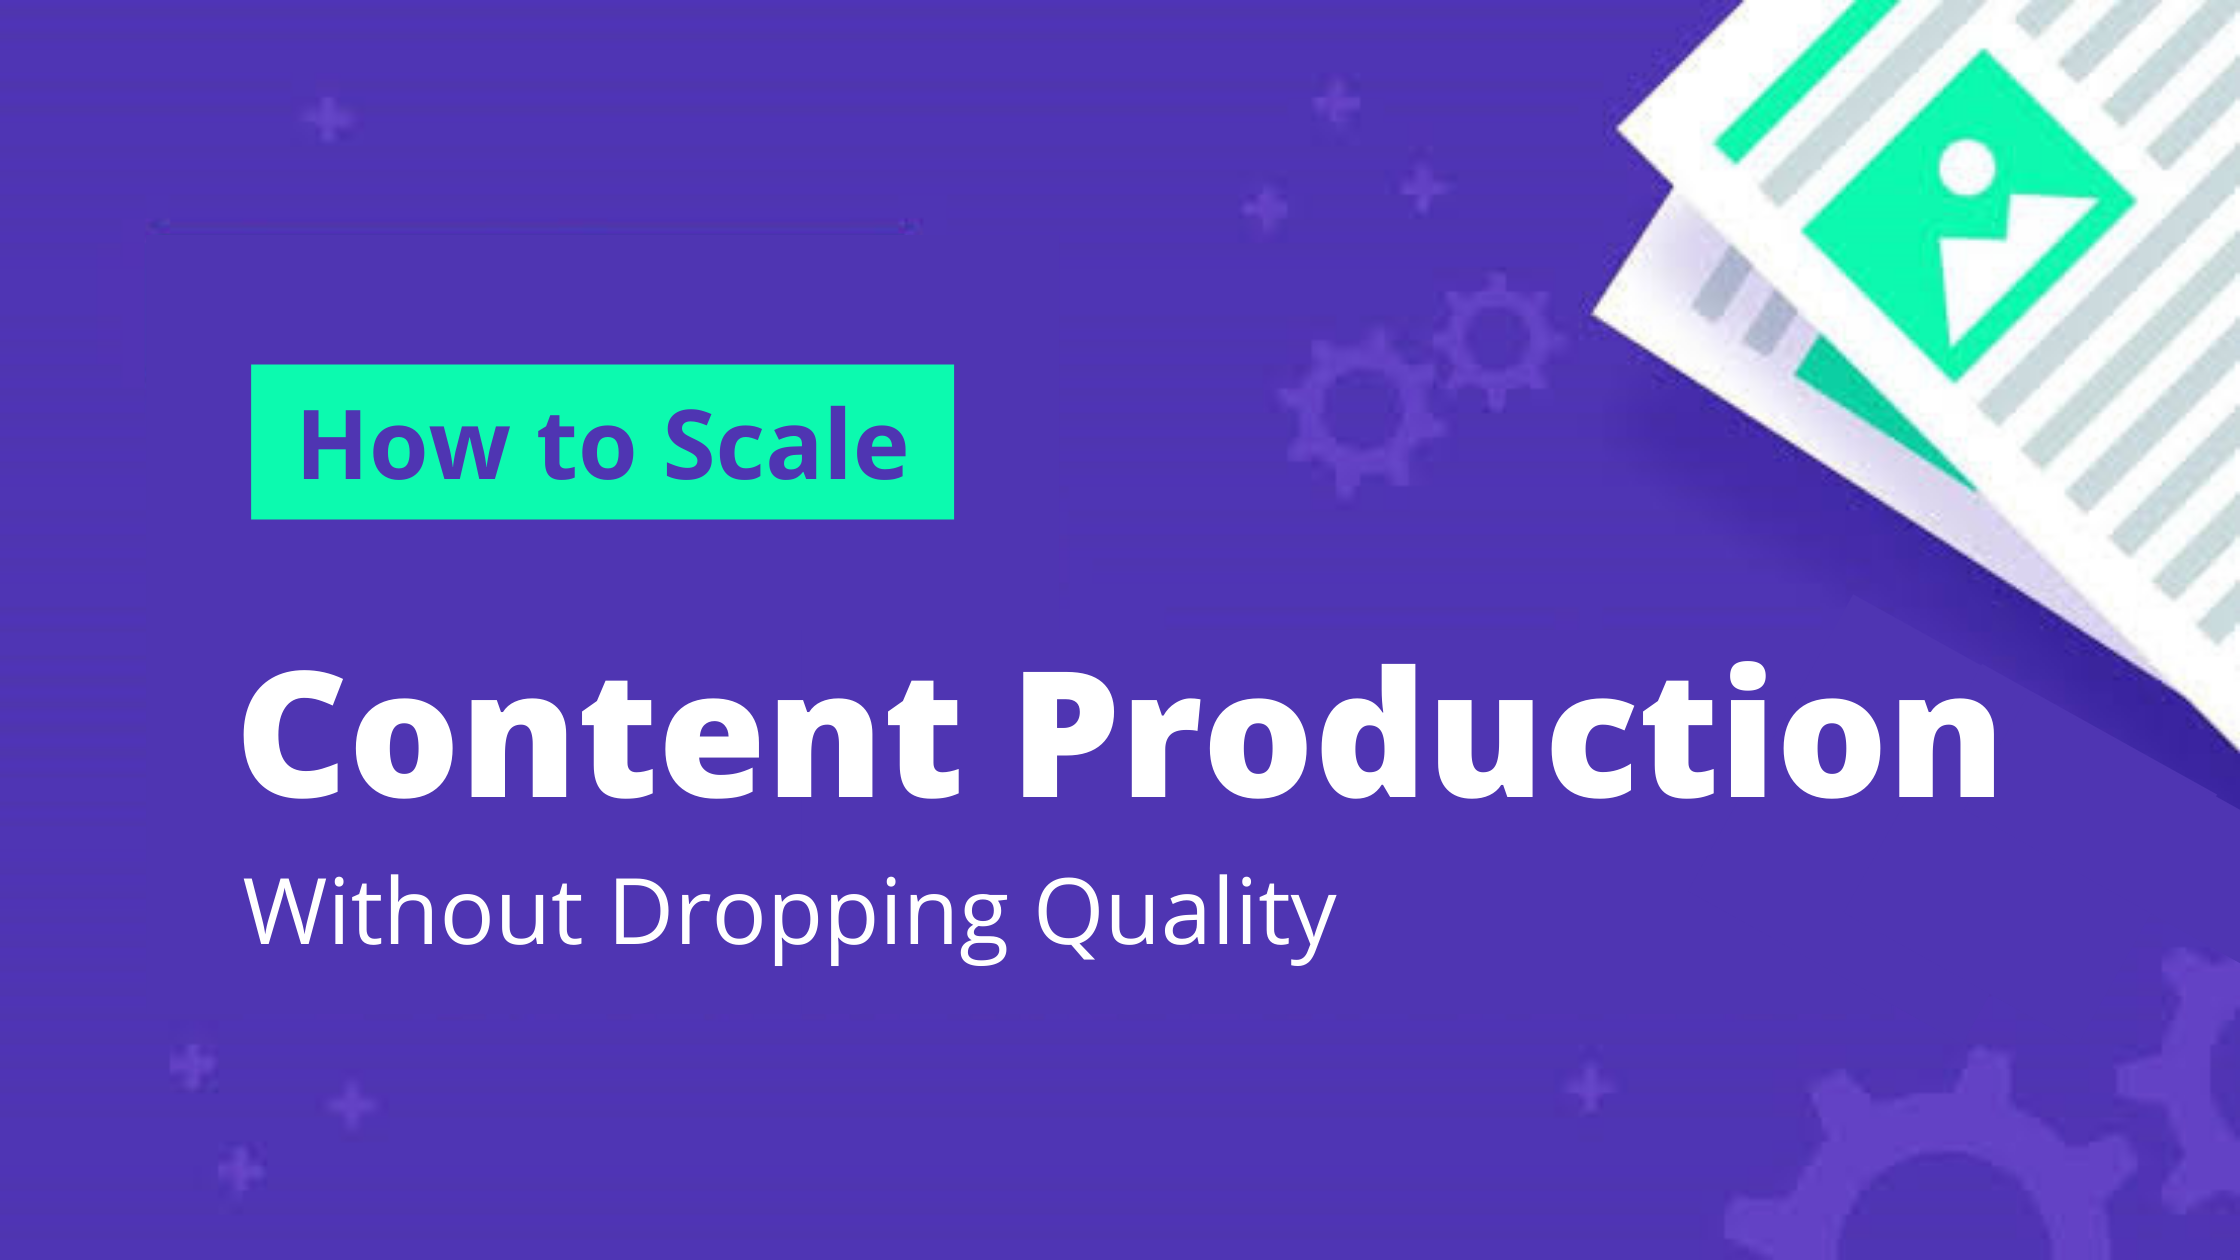 How to Scale Content Production